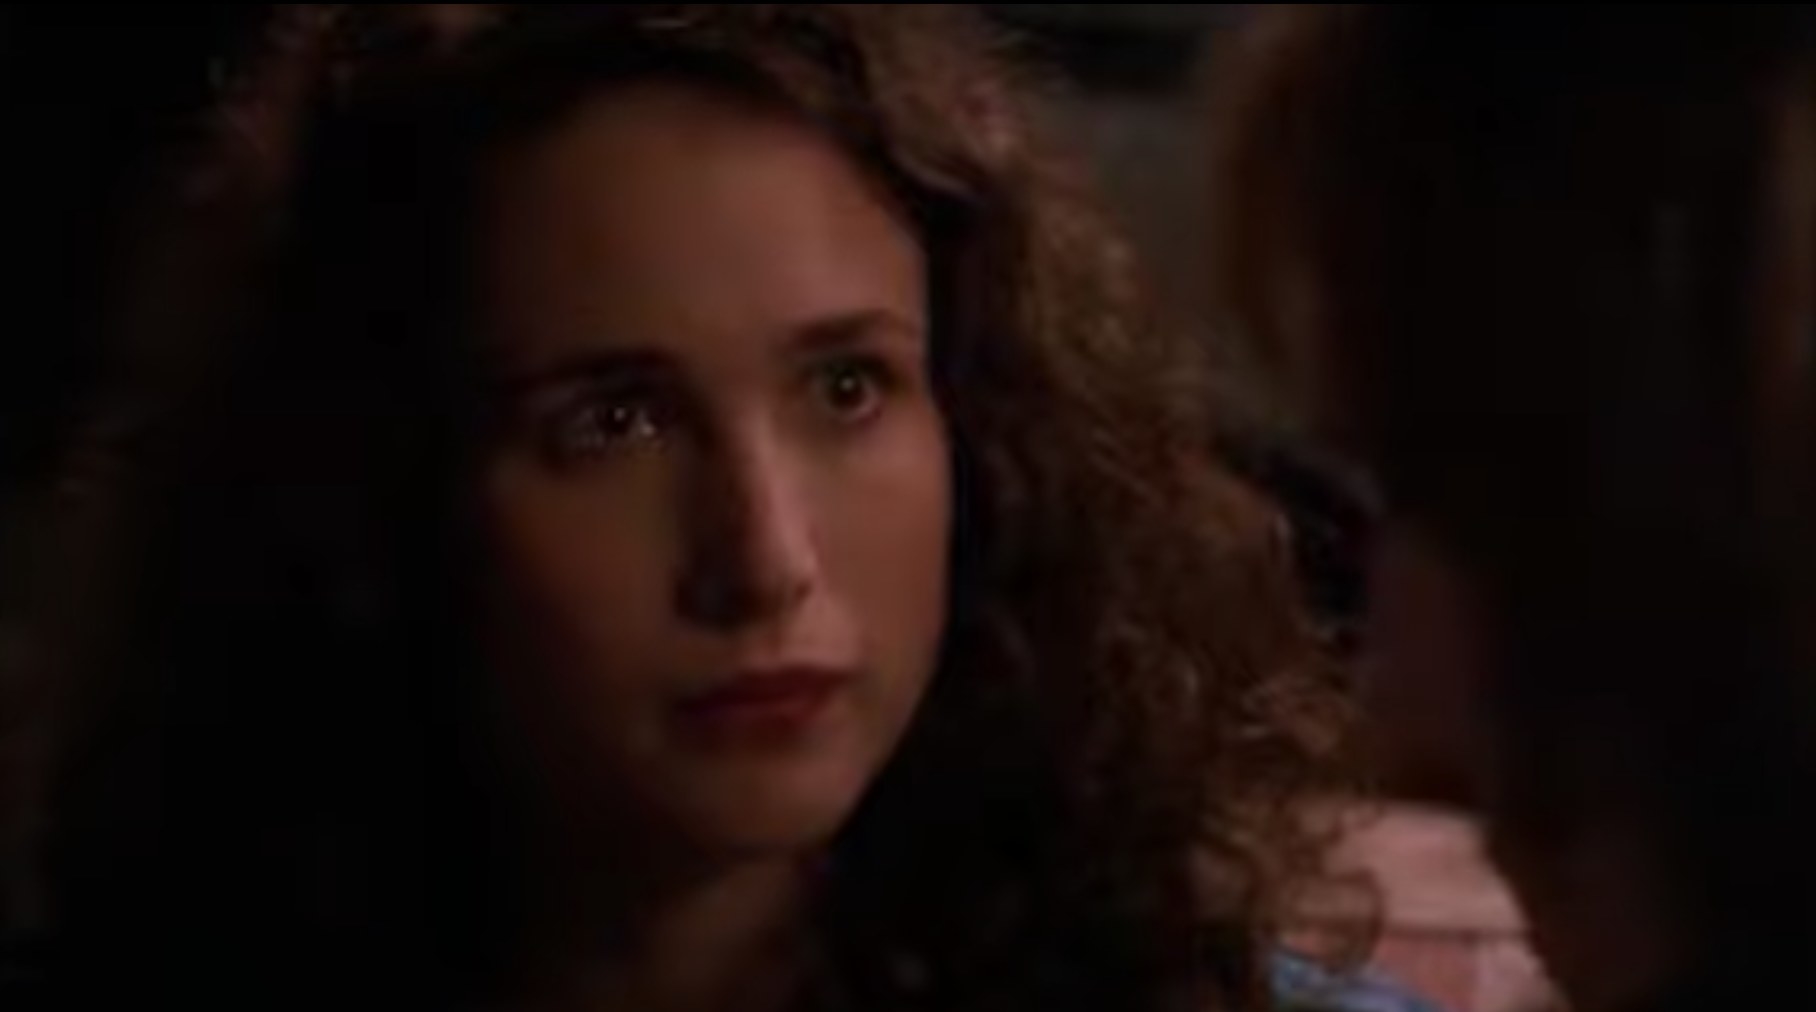 Andie MacDowell stares longingly at a man with his back to the camera.